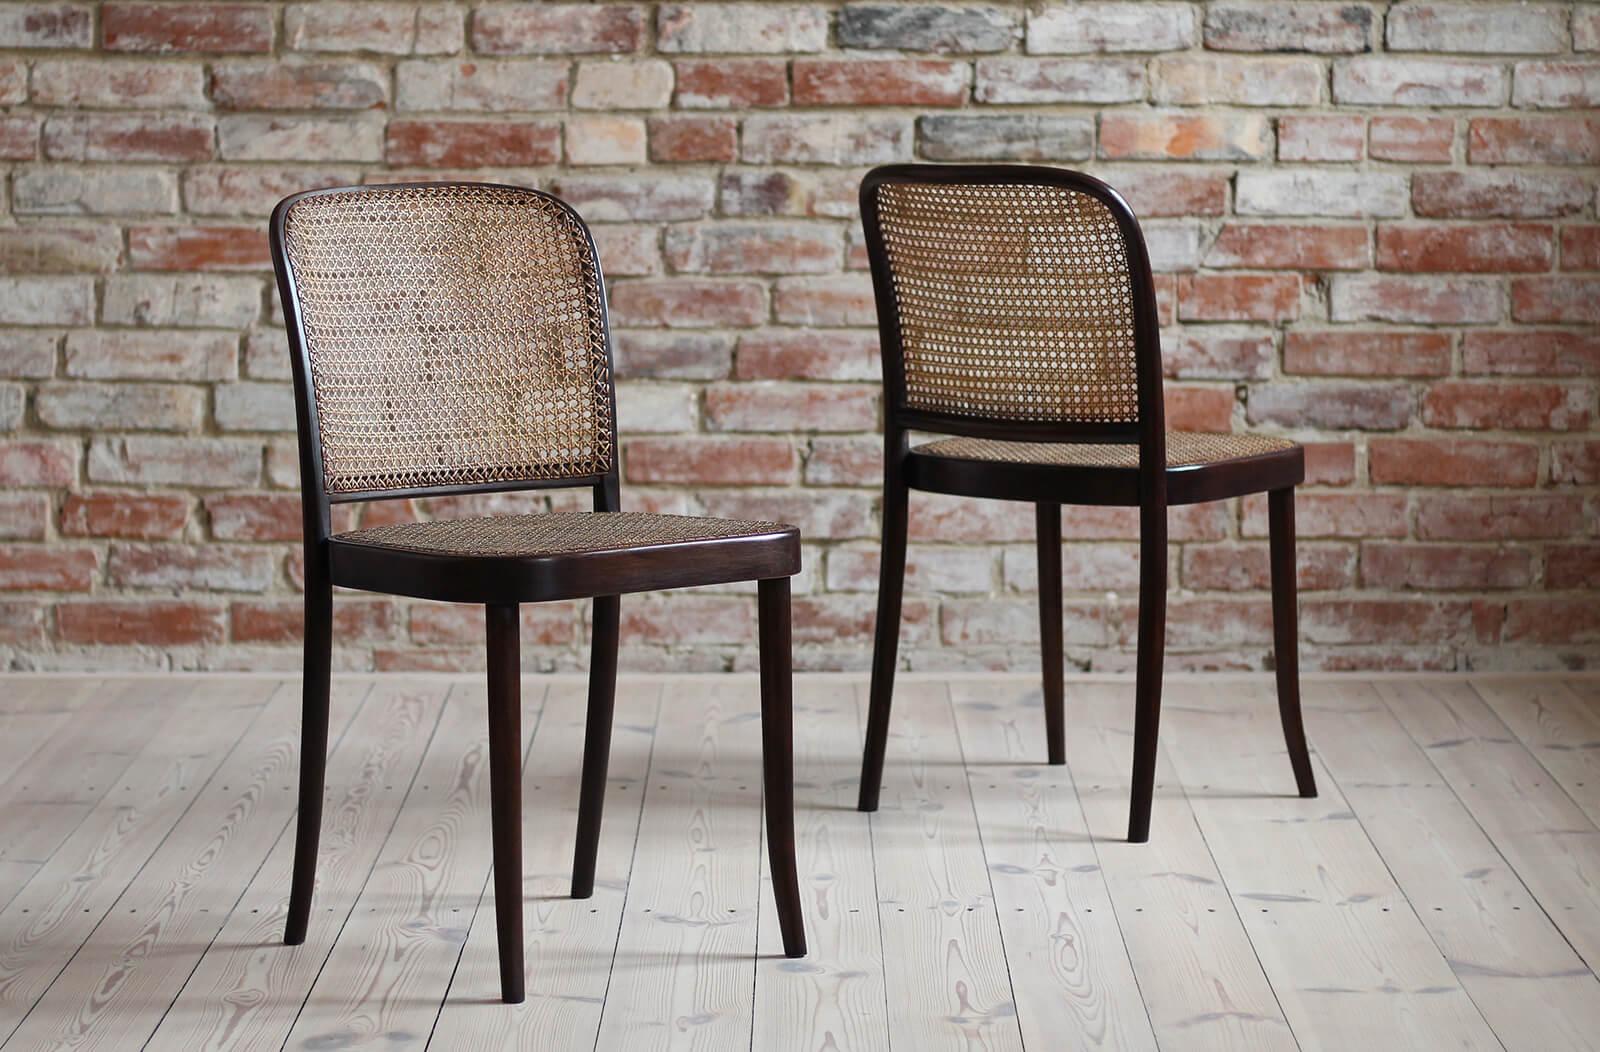 Mid-20th Century Set of 4 Thonet Dining Chairs designed by J. Hoffmann, Model No. 811, 1940s